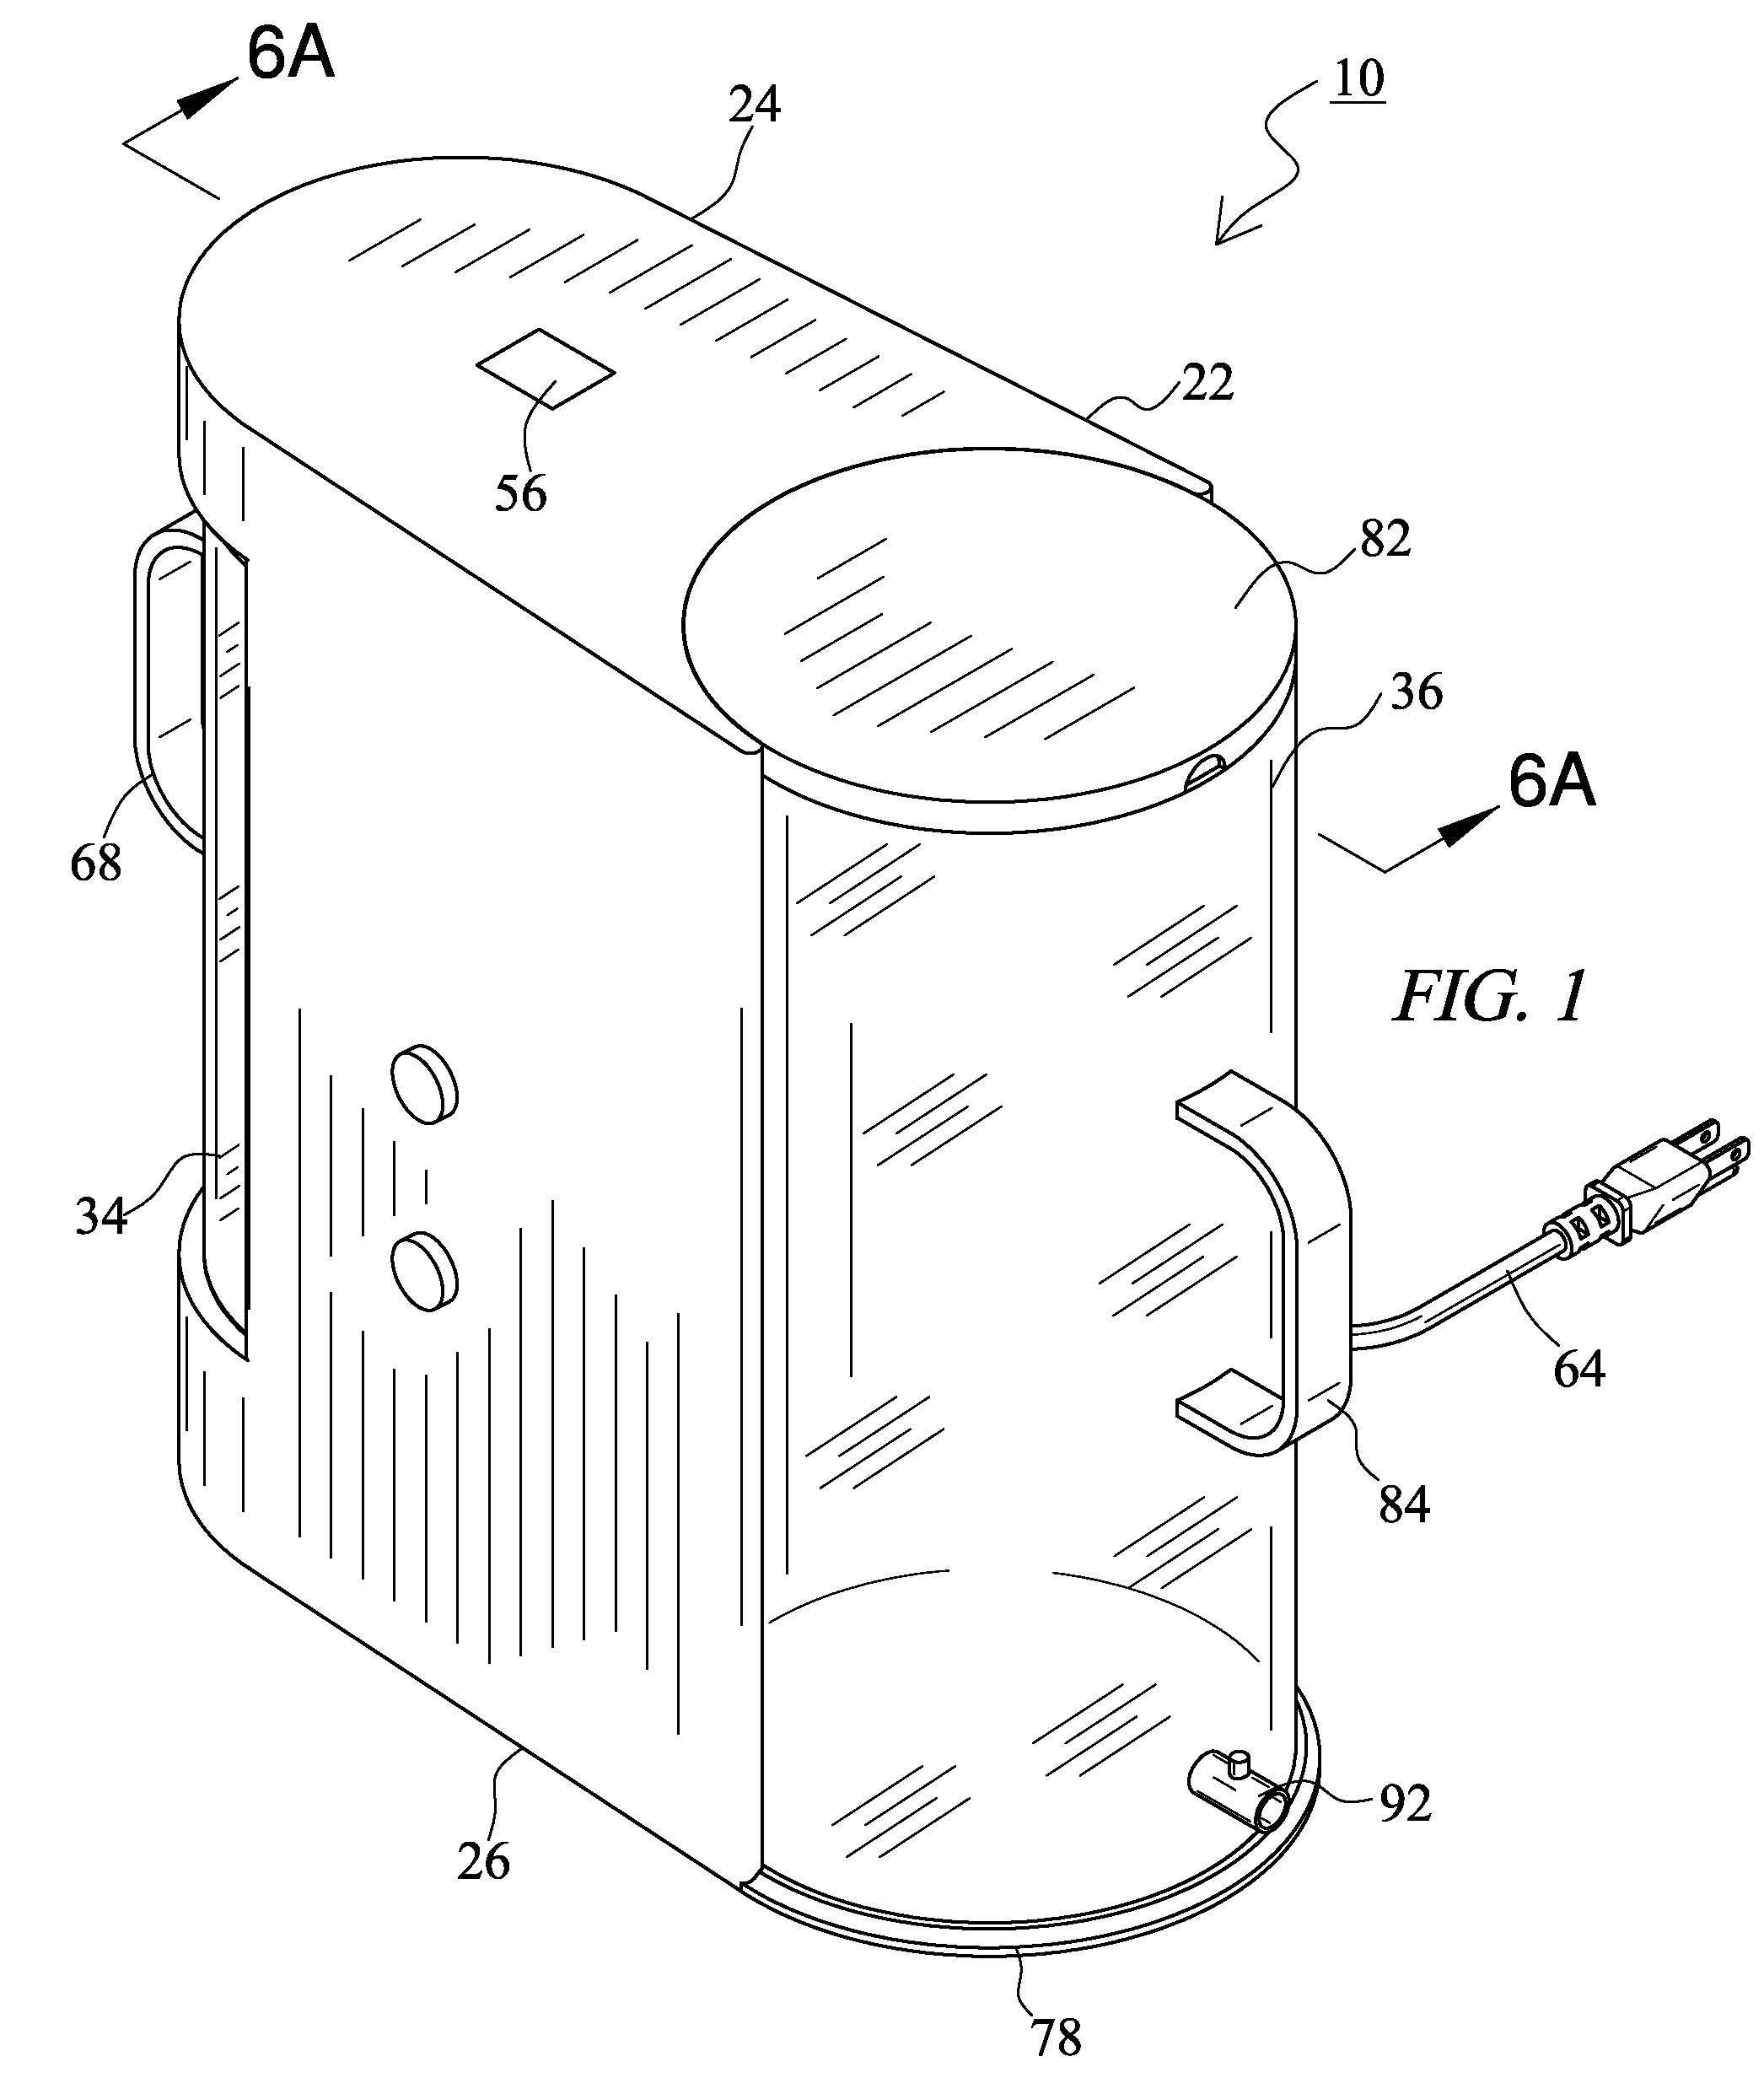 Apparatus for washing and sanitizing articles for an infant